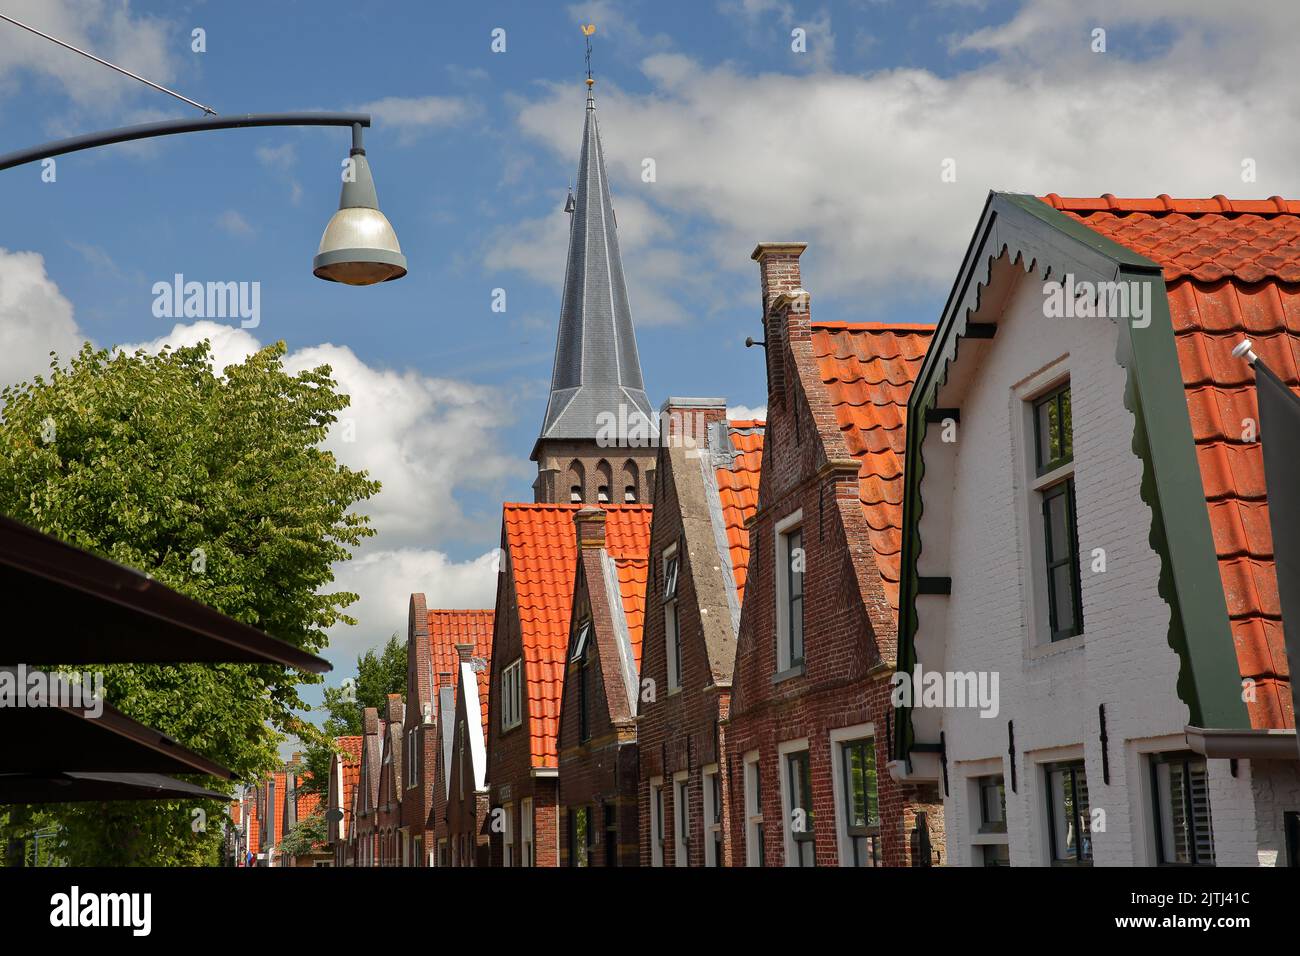 The historic center of Balk, Friesland, Netherlands, with a raw of historic houses, and the tower of the Raadhuis (former town hall built in 1615) Stock Photo